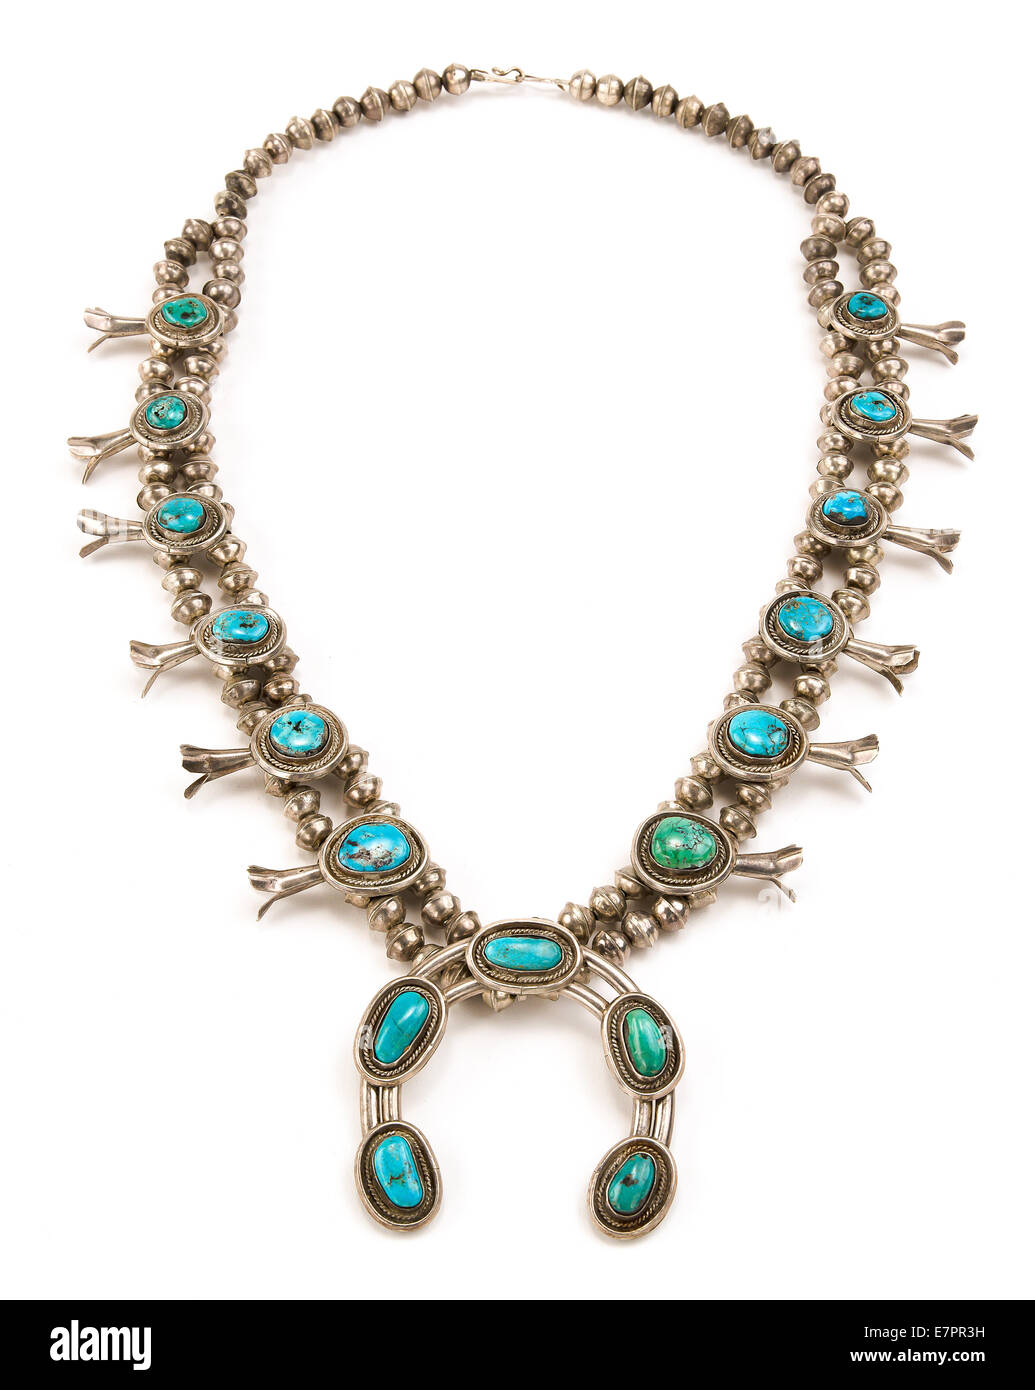 Navajo Sterling Silver and Turquoise Squash Blossom Necklace. Stock Photo